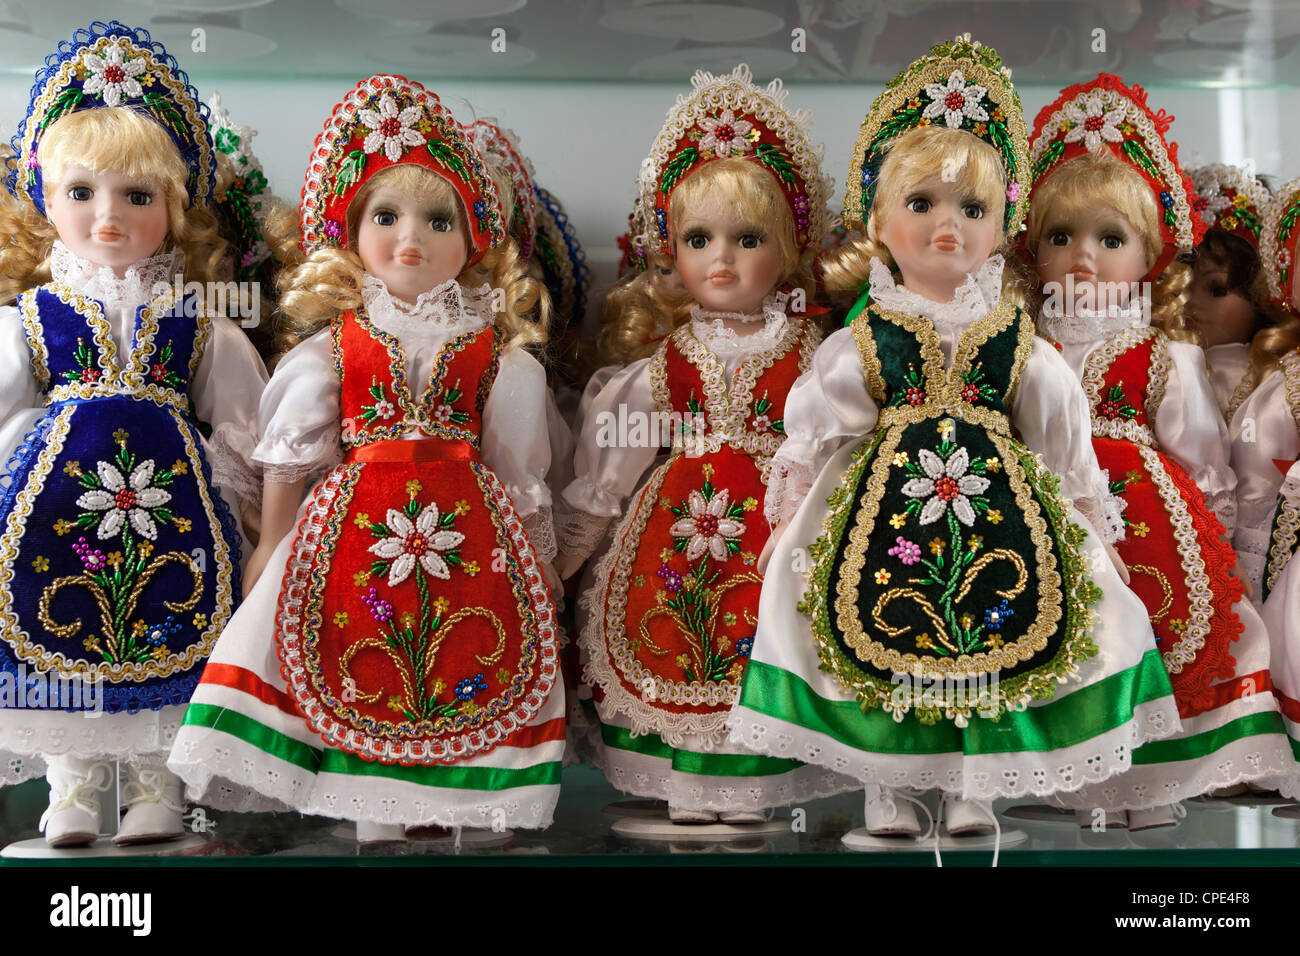 Souvenir dolls in traditional Hungarian costumes, Budapest, Hungary, Europe Stock Photo